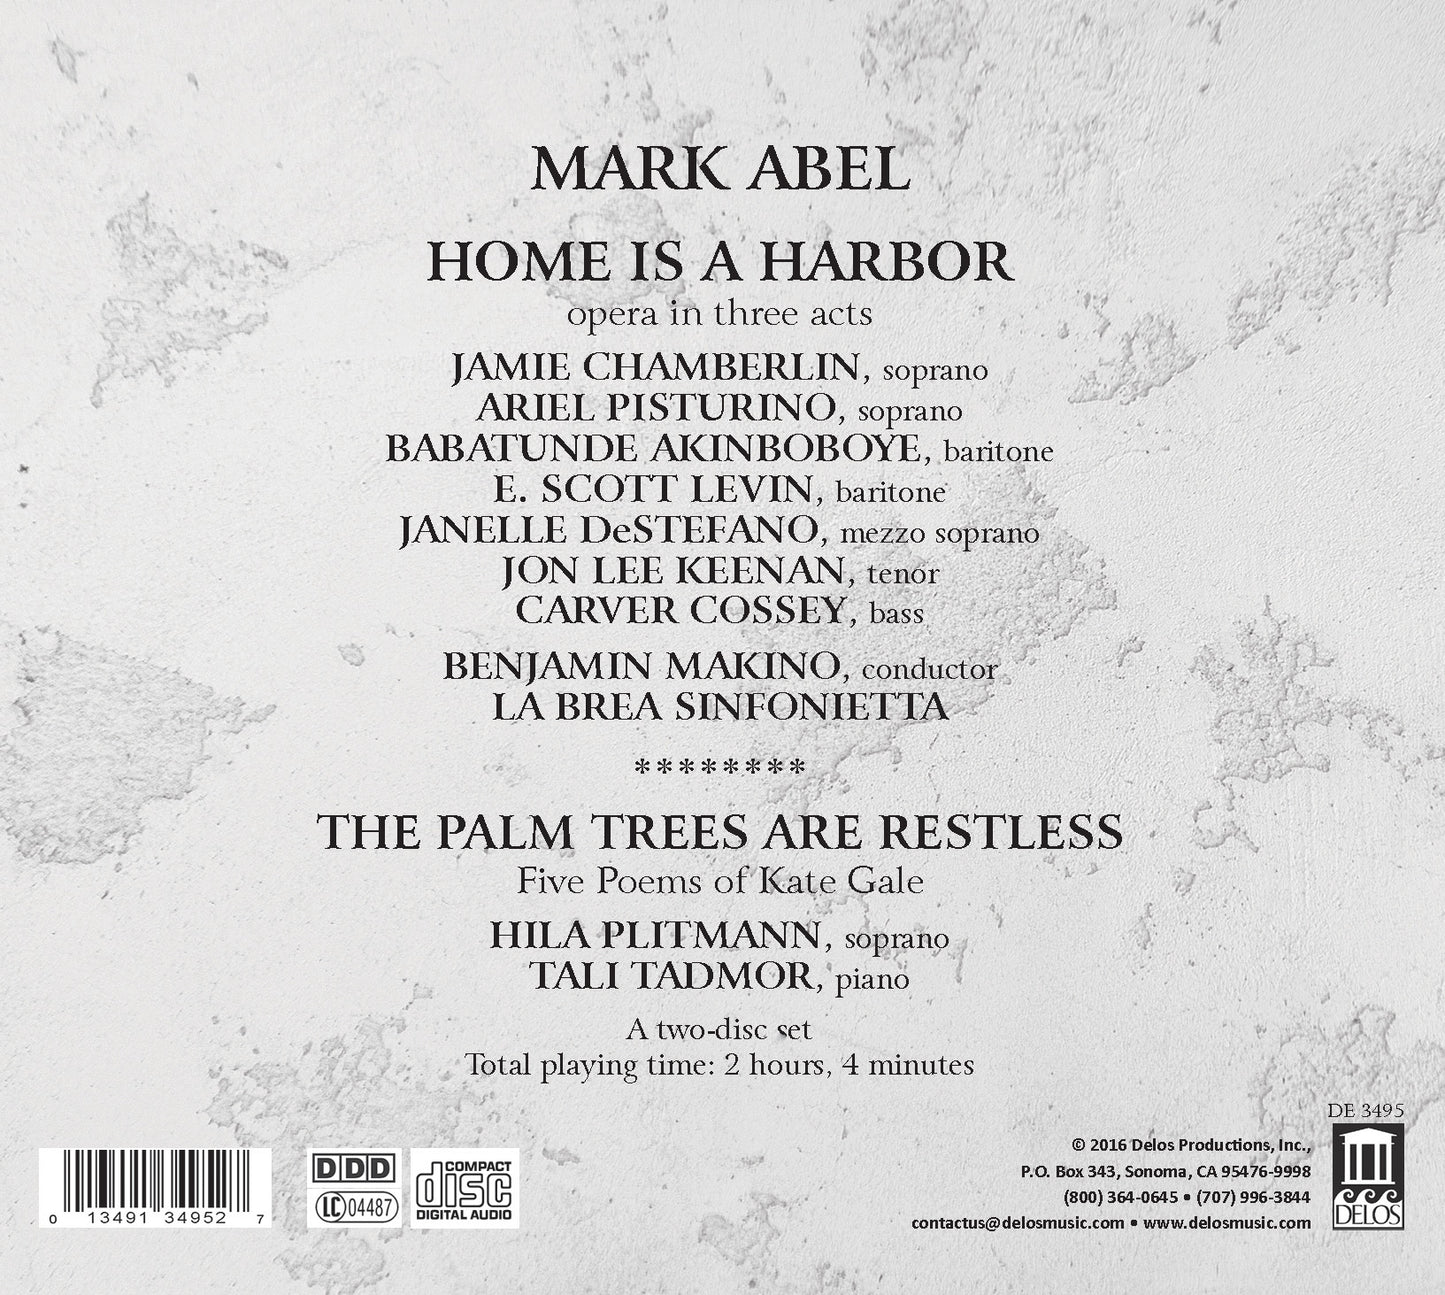 Mark Abel: Home Is A Harbor & The Palm Trees Are Restless